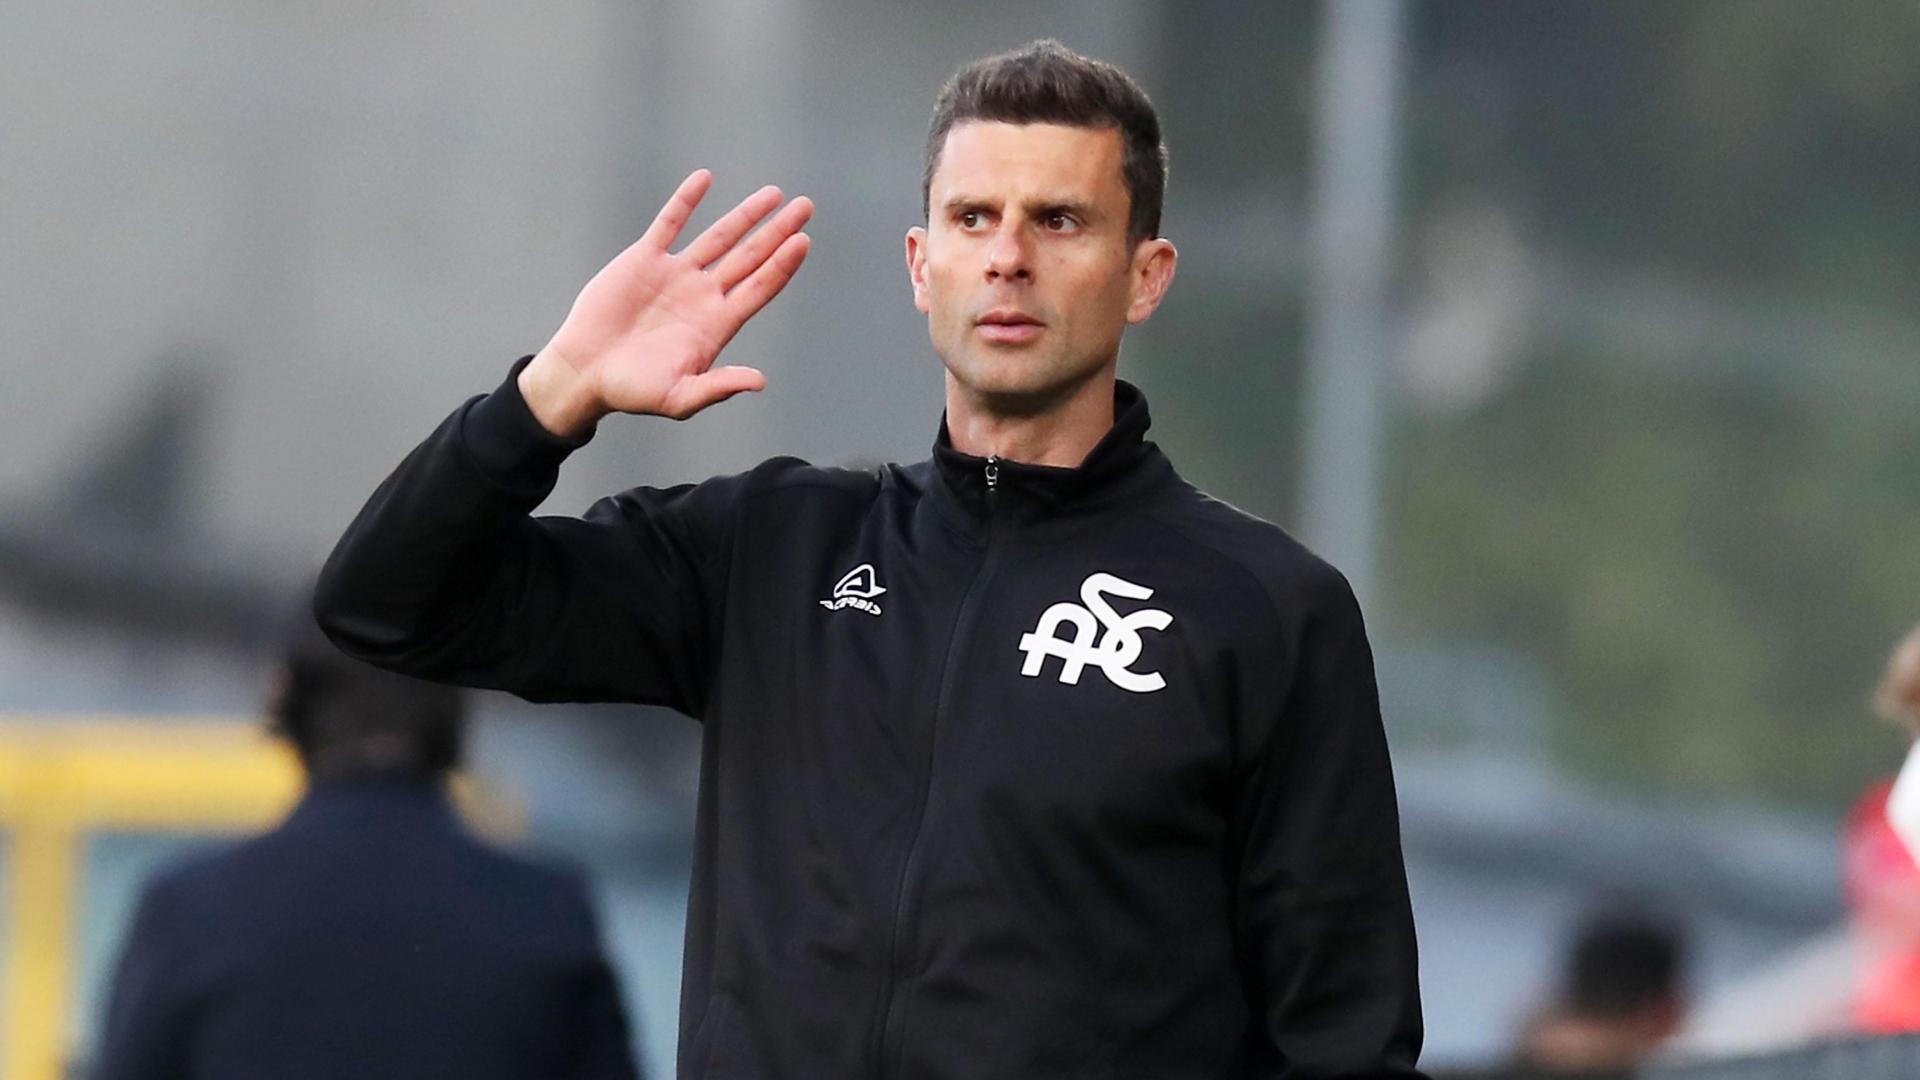 Thiago Motta: "In the game for 90 minutes, satisfied with the lads"